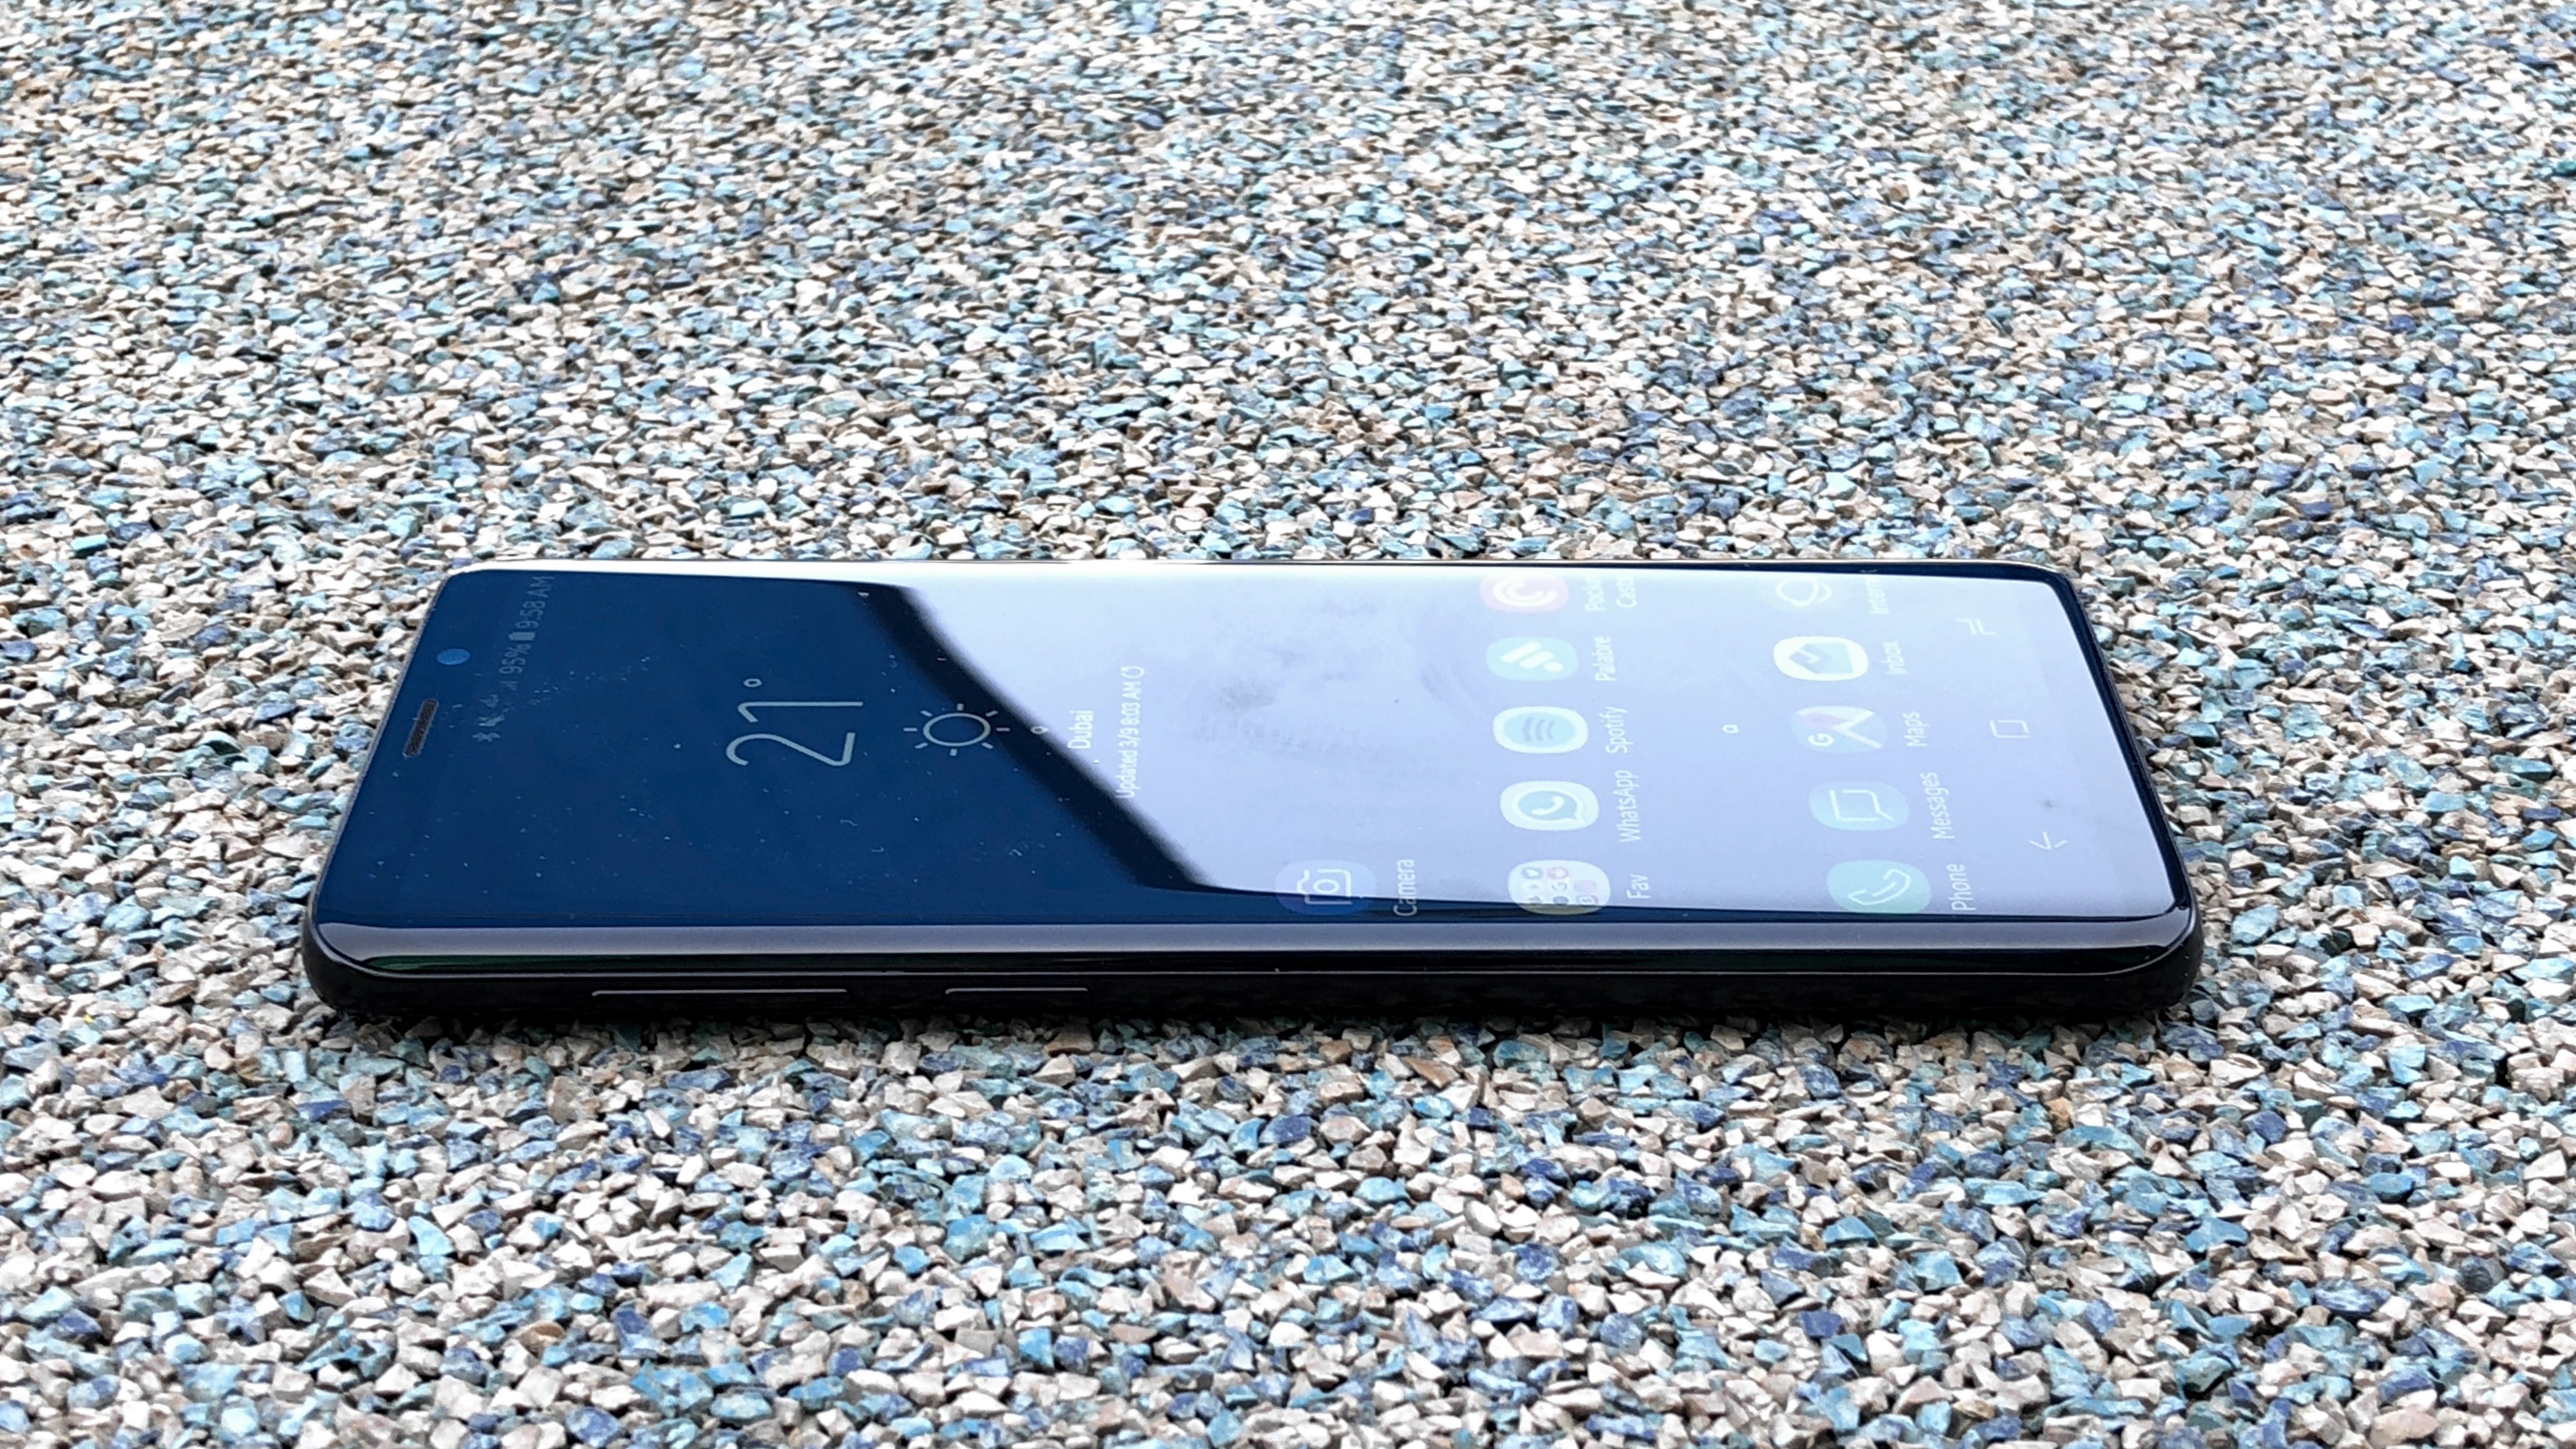 Samsung’s top Galaxy S10 model could be called the Samsung Galaxy S10 X